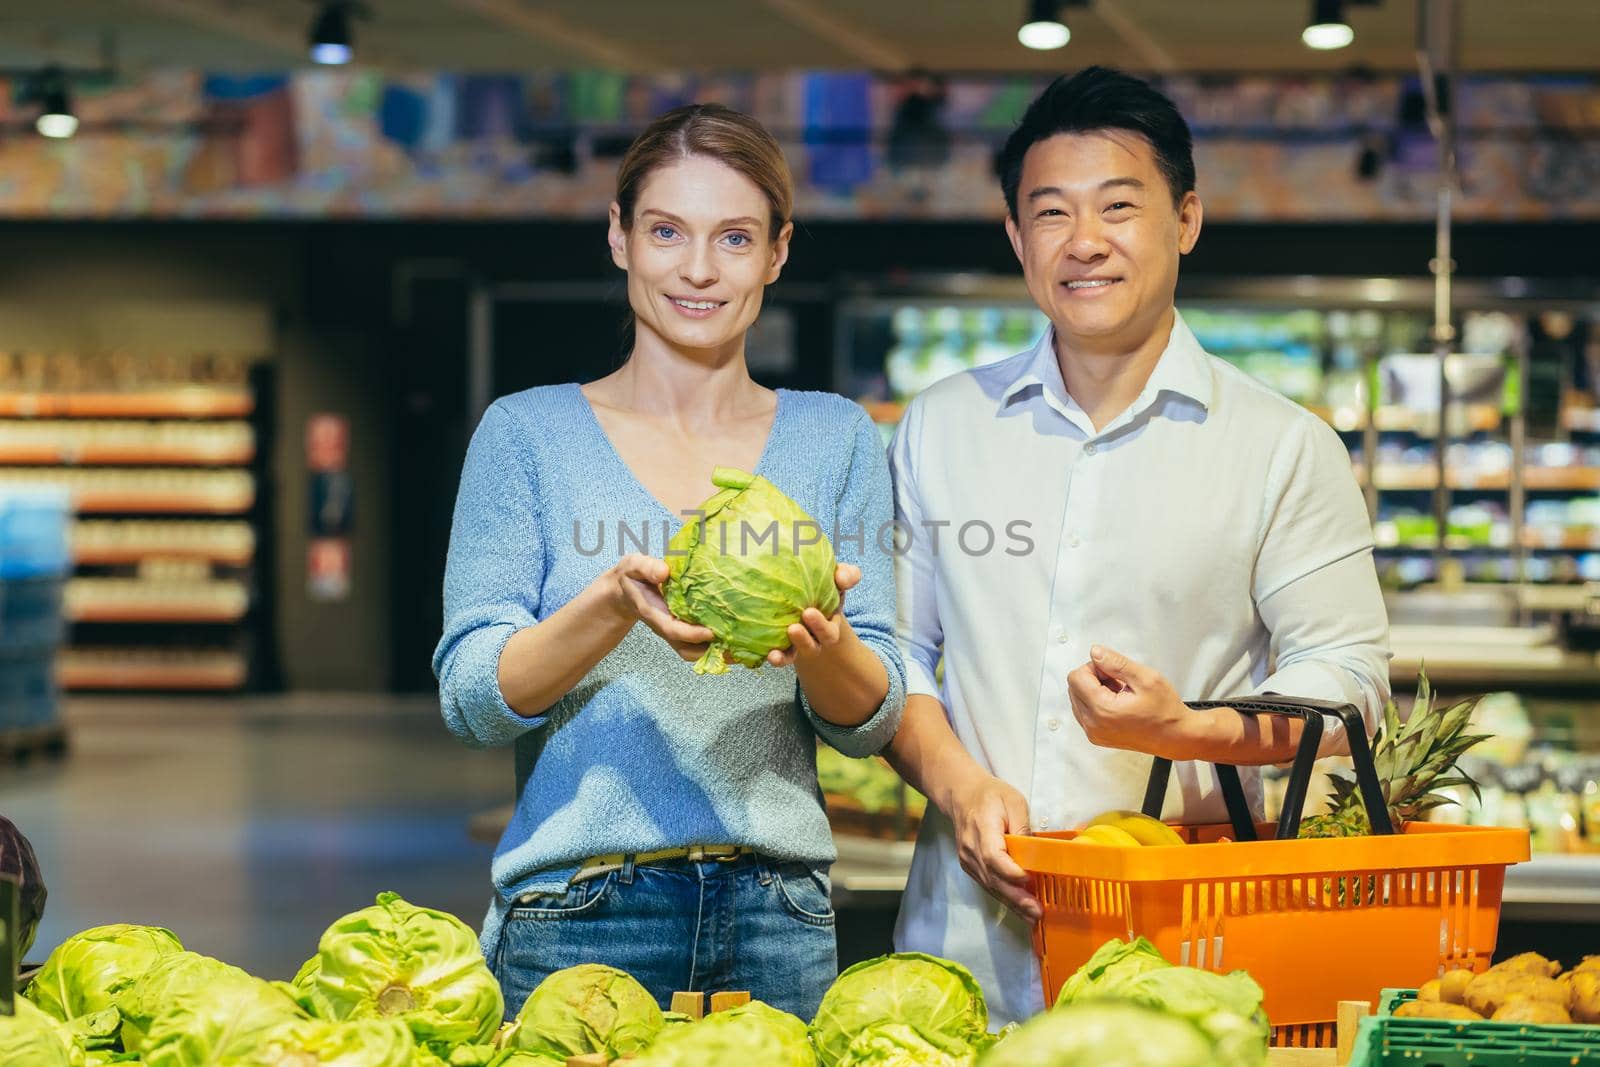 Young married couple, Asian man and blonde woman in supermarket, shoppers choose vegetables in vegetable section, portrait of happy shoppers, smiling looking at camera